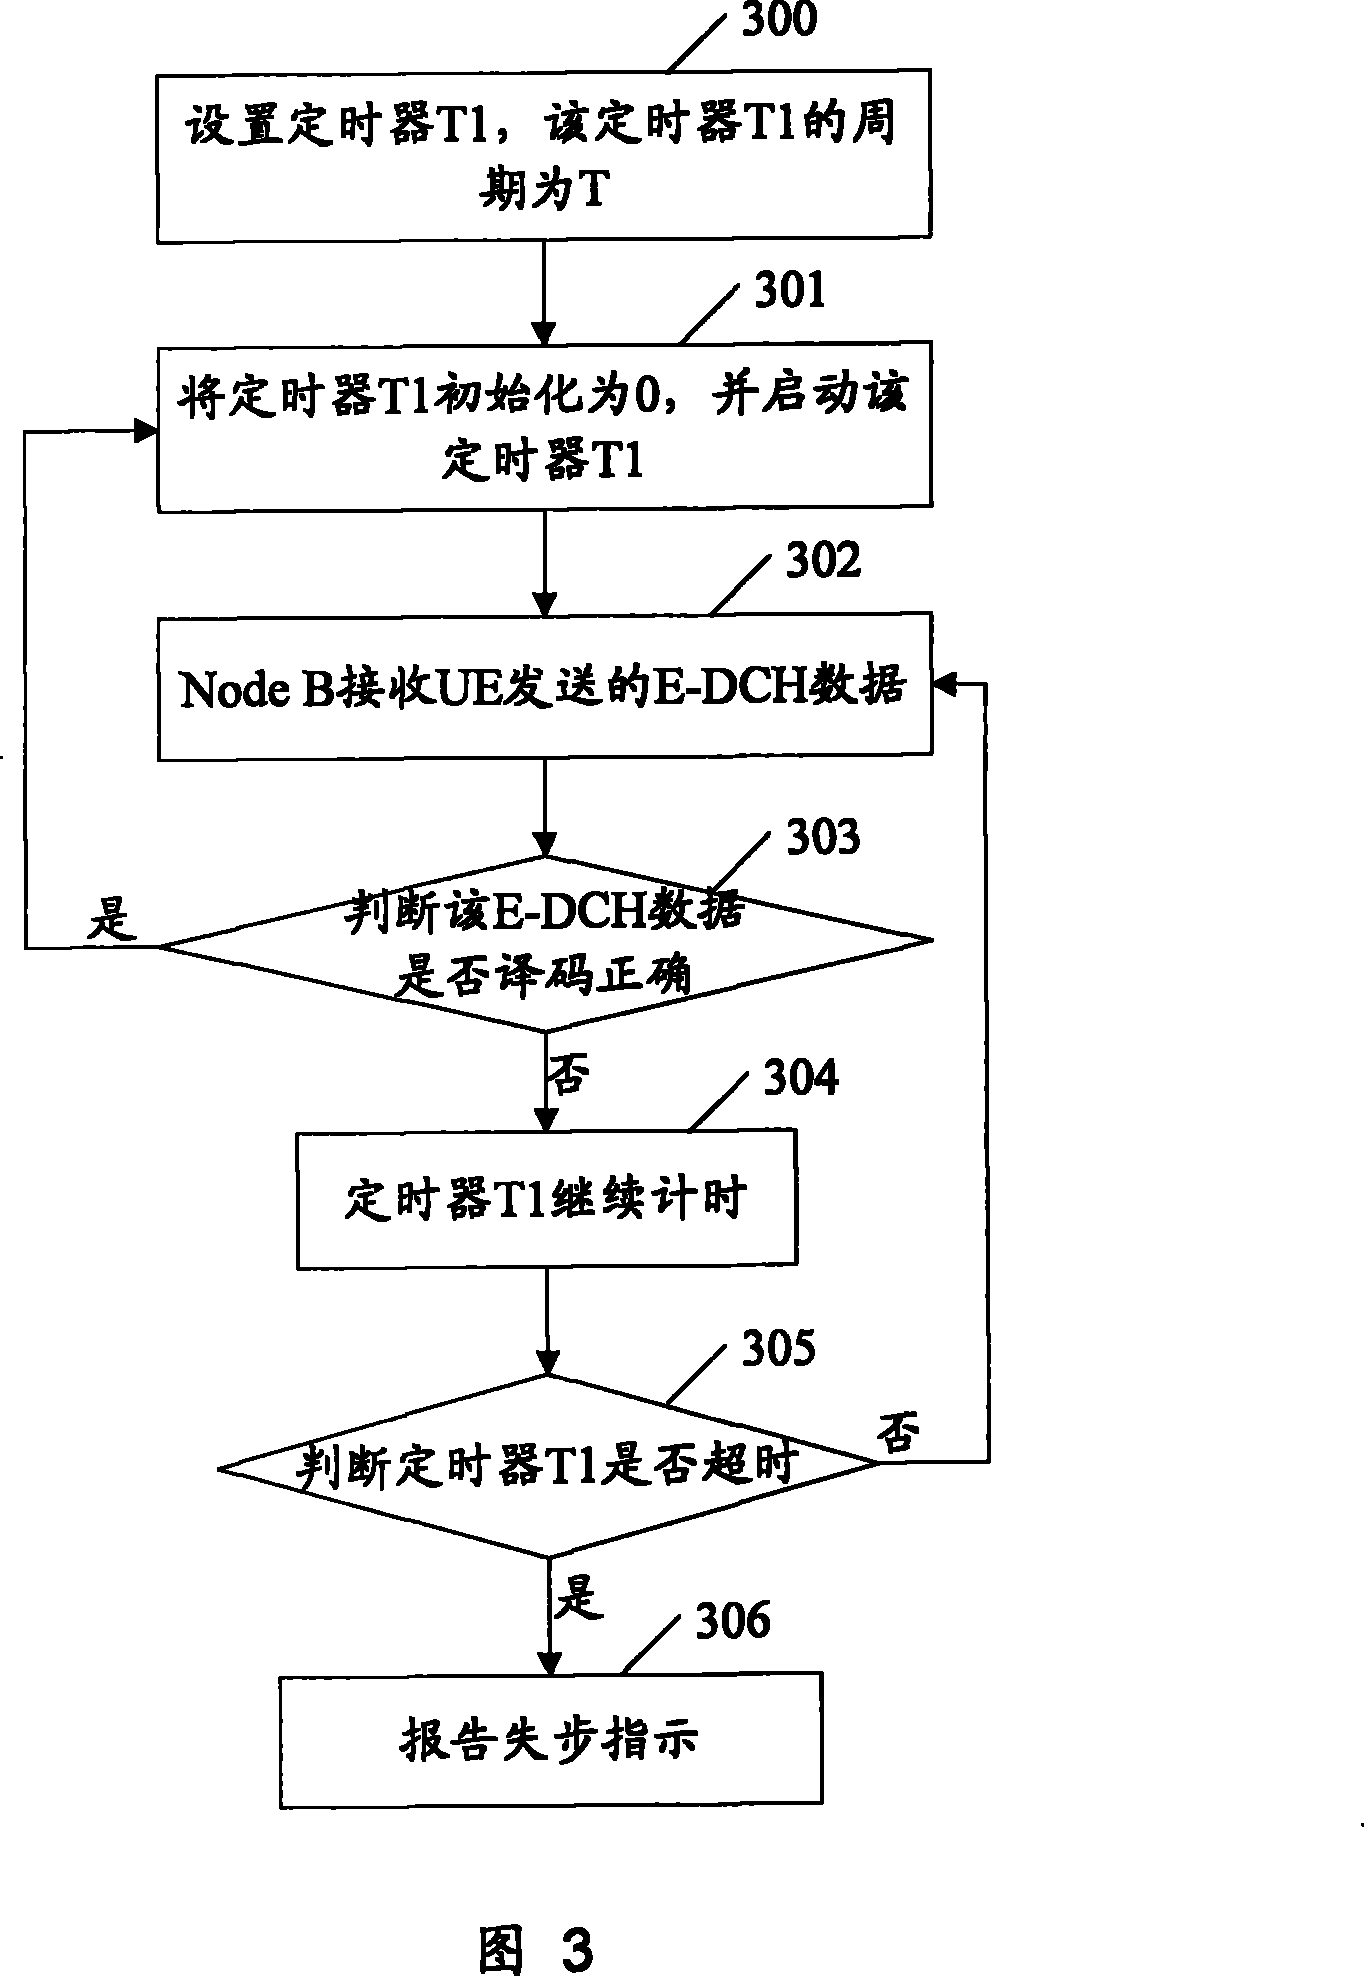 In-sync and out-of-sync indication reporting method and apparatus, wireless link monitoring method and system